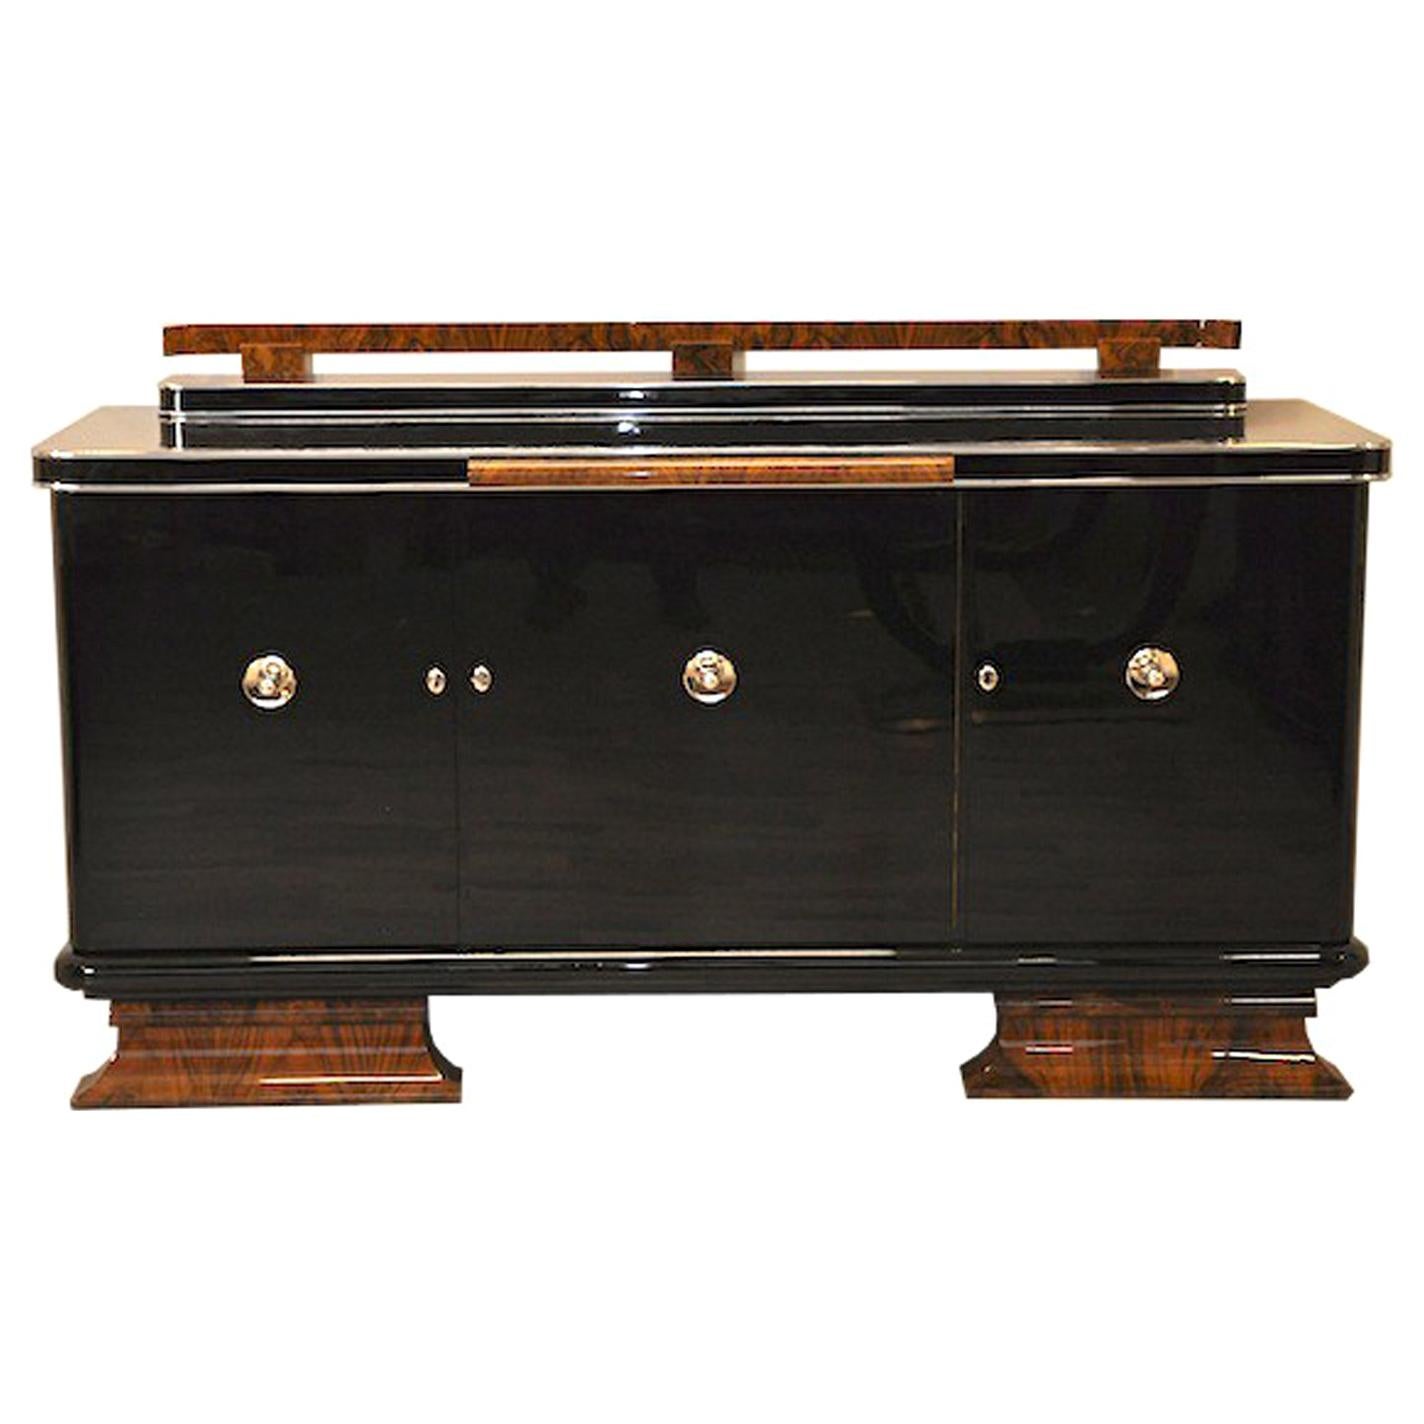 Sophisticated Art Deco Sideboard or Credenza